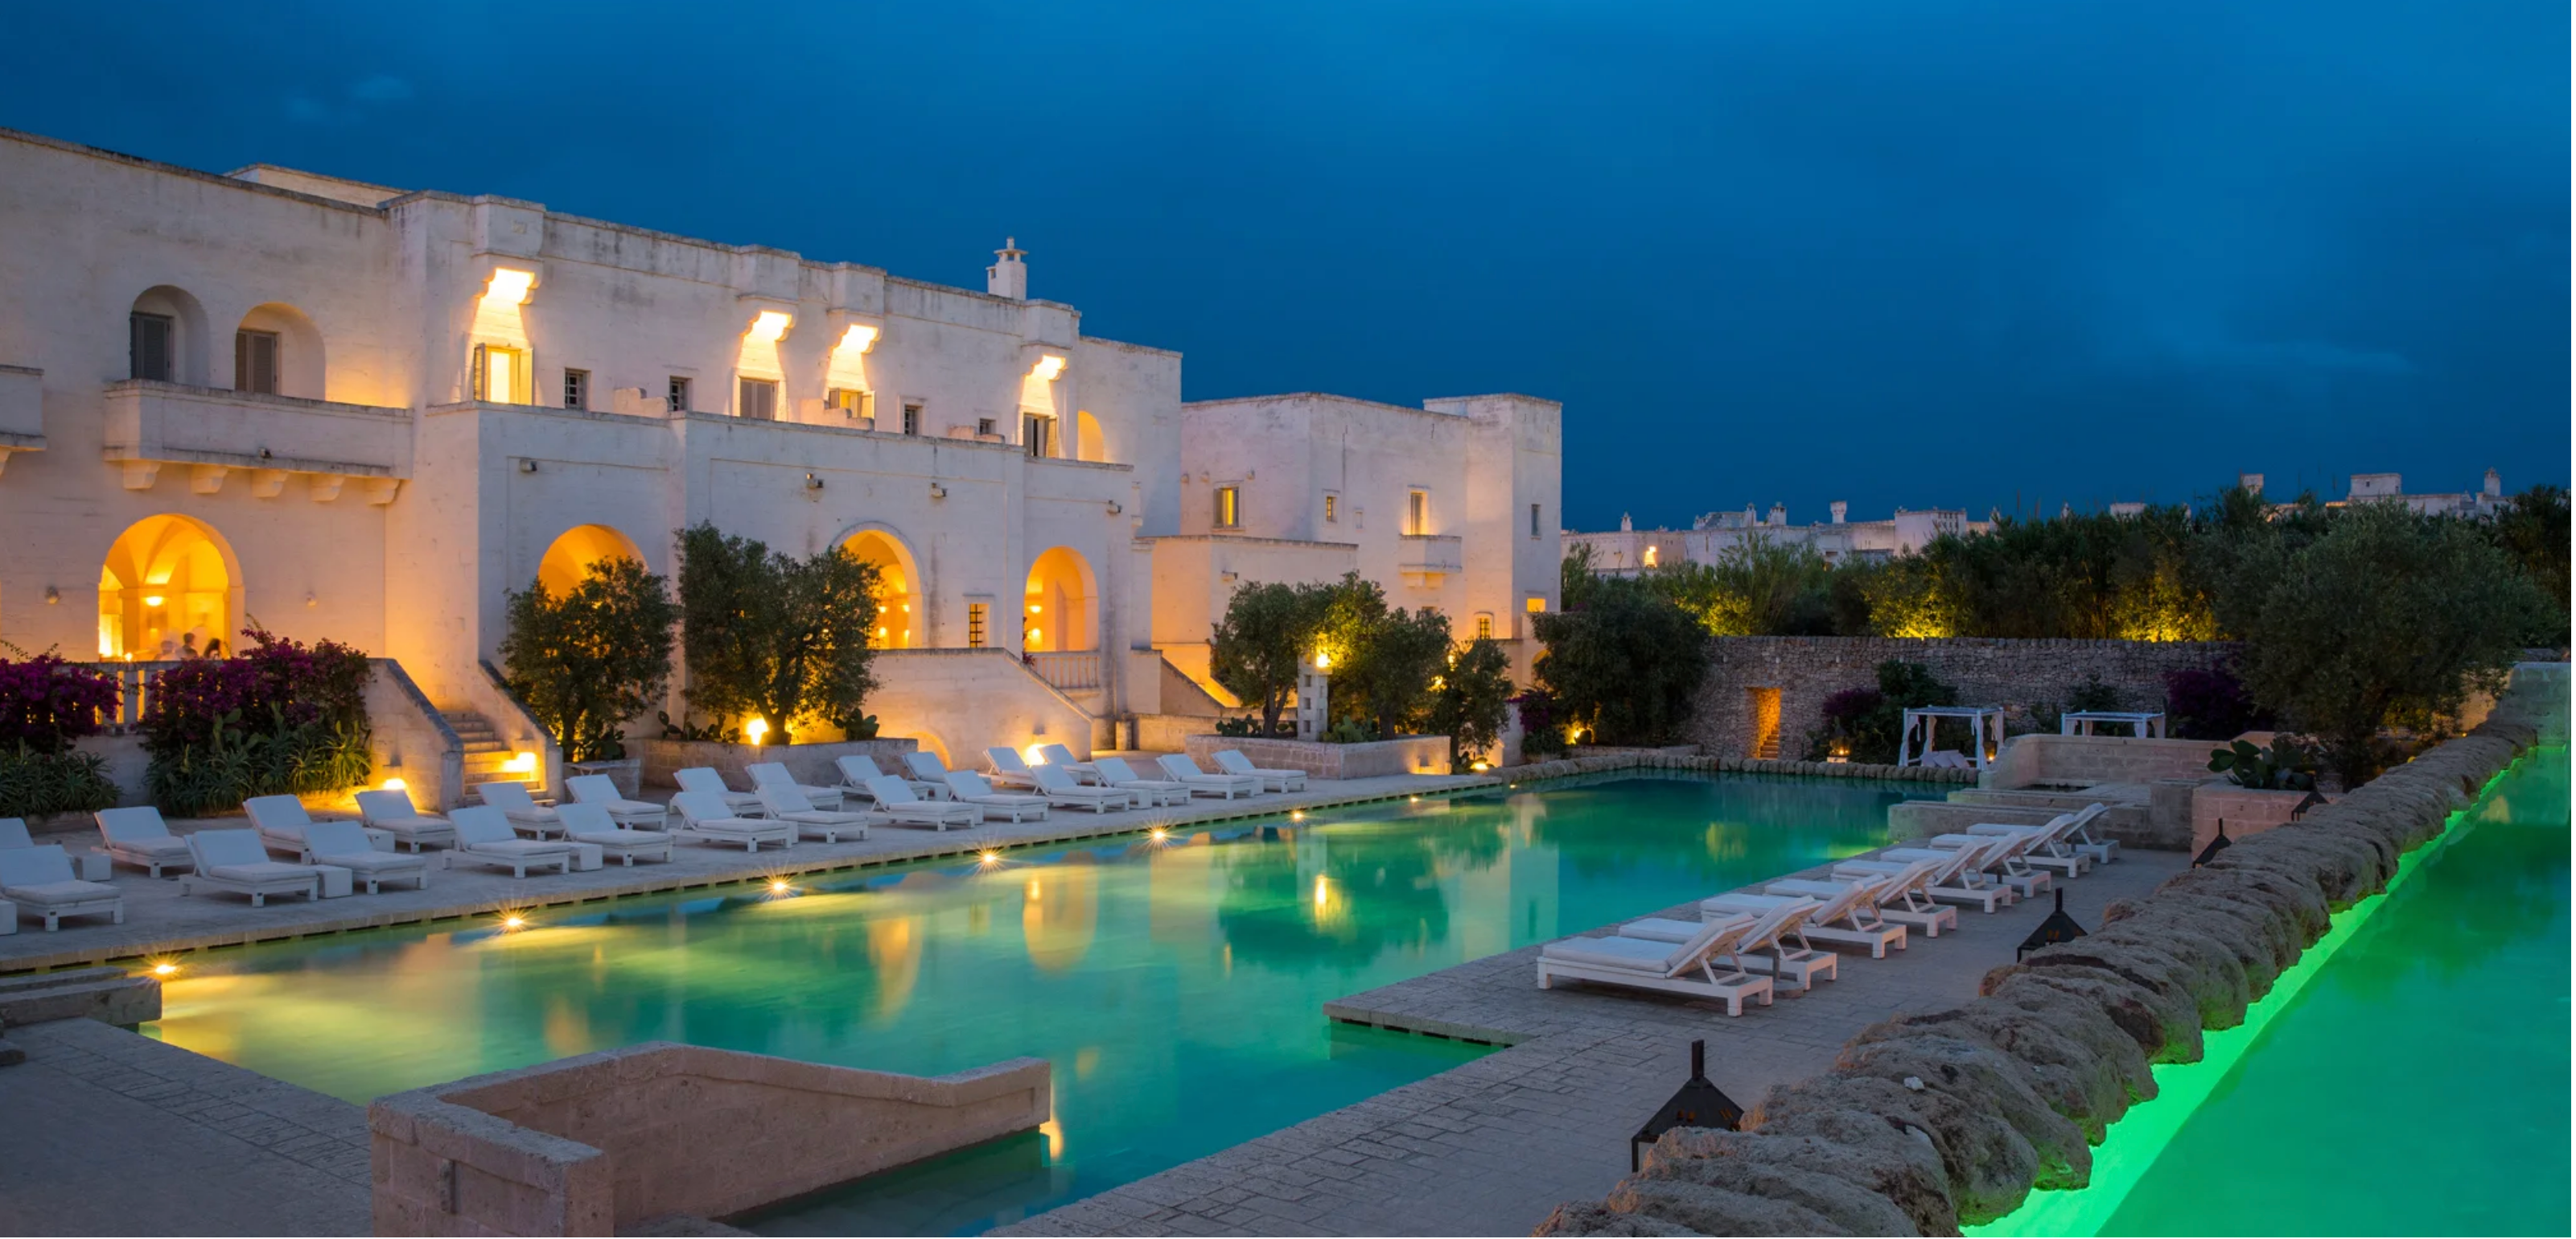 A Weekend at the Borgo Egnazia